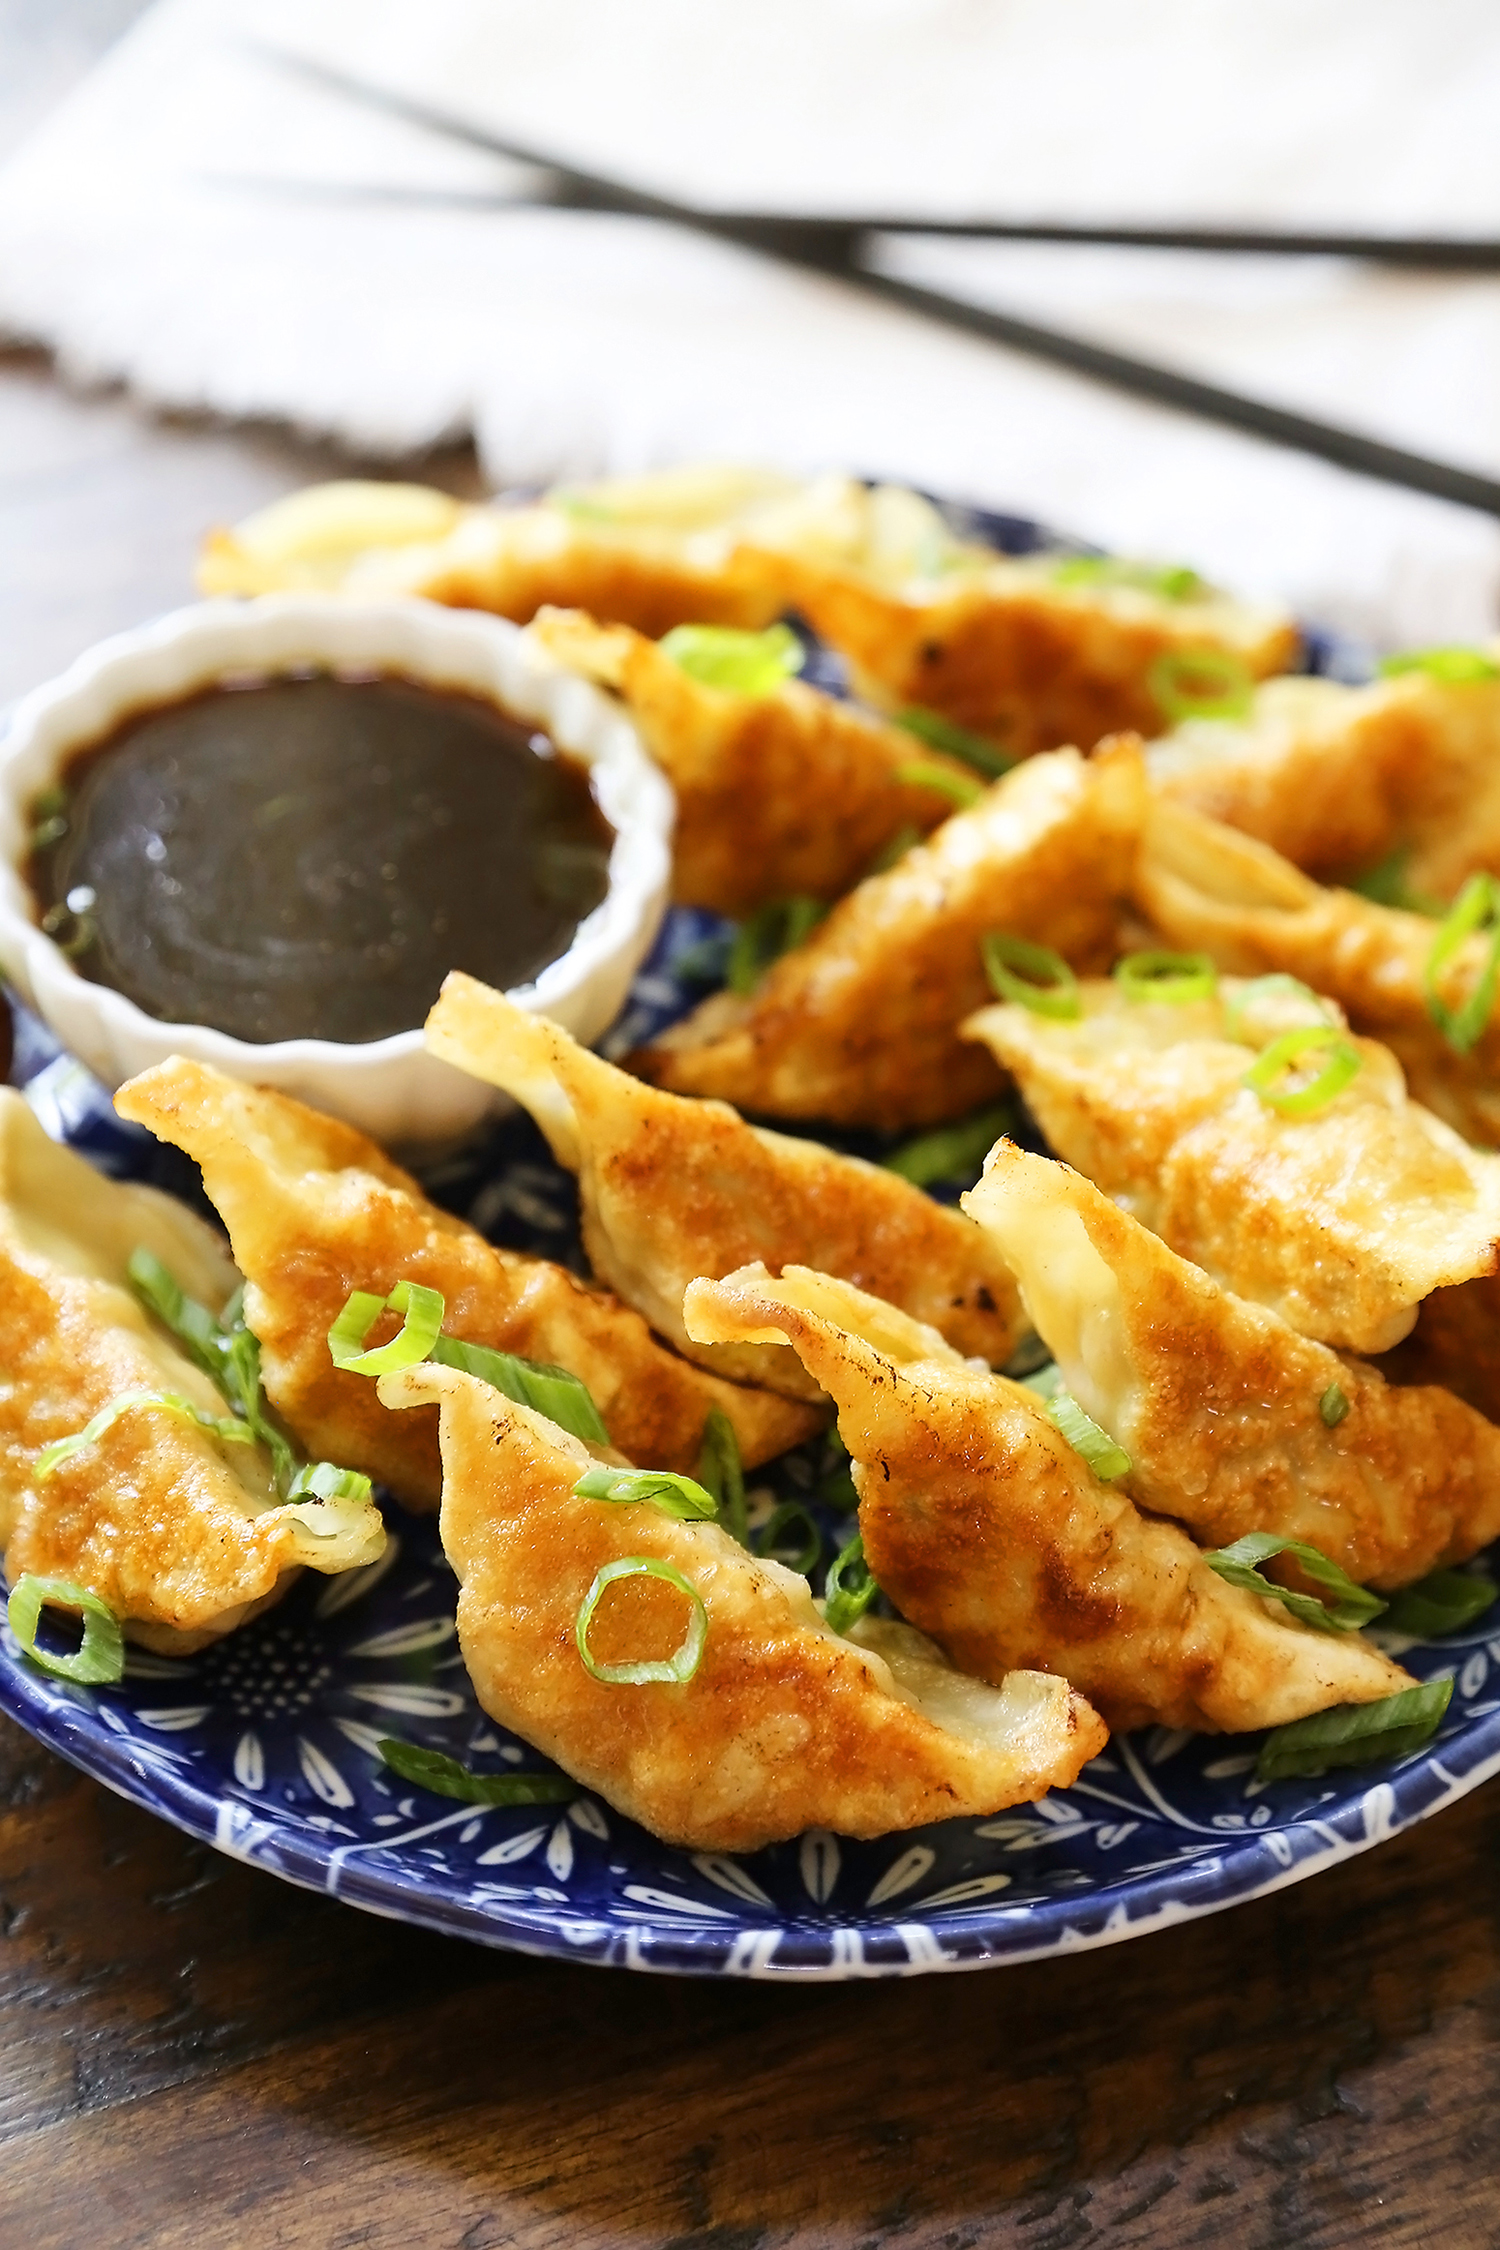 Easy Asian Dumplings with Soy-Ginger Dipping Sauce - Crispy, tender steamed potstickers, made easily in one skillet! thecomfortofcooking.com